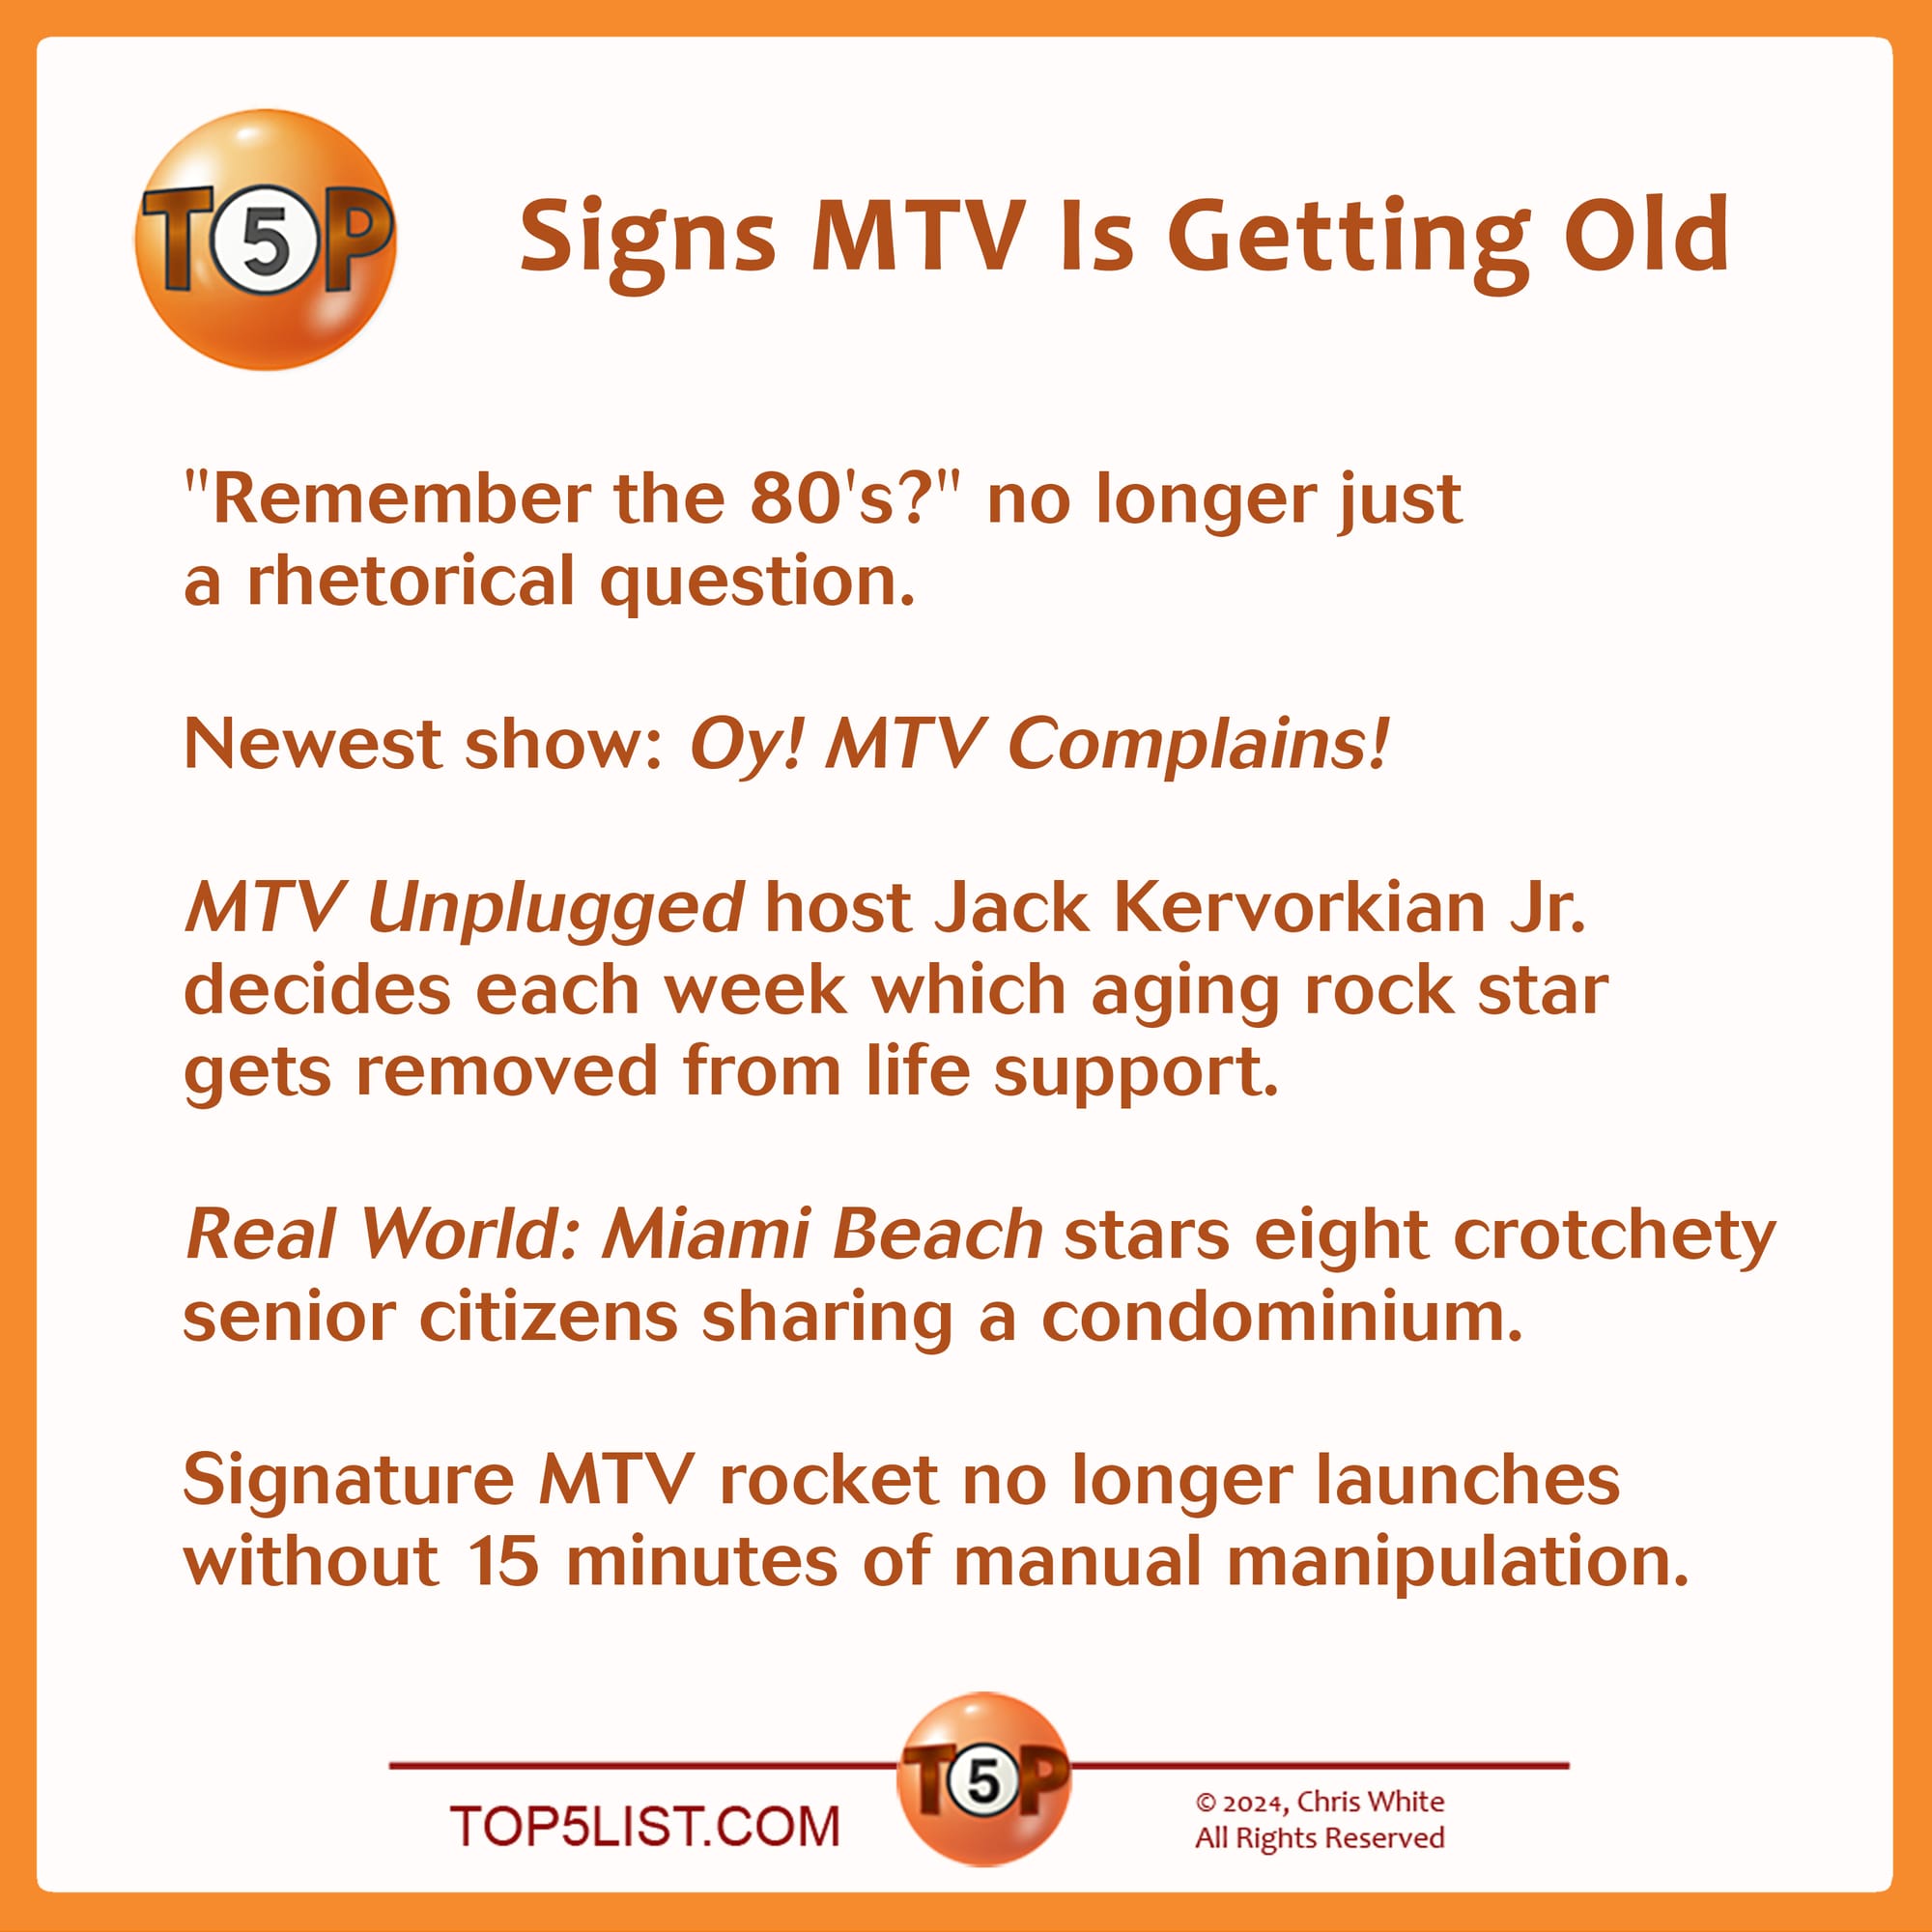 Signs MTV Is Getting Old  |  "Remember the 80's?" no longer just a rhetorical question.      Newest show: "Oy! MTV Complains!"    New "MTV Unplugged" host Jack Kervorkian Jr. decides each week which aging rock star to remove from life support.      "Real World: Miami Beach" stars eight crotchety senior citizens sharing a condominium.      Signature MTV rocket no longer launches without 15 minutes of manual manipulation.         Selected from 102 submissions from 39 contributors. Credits:   5 - Fred Hesby, Portland, OR 4 - David Kass, Brooklyn, NY 3 - Bruce Ansley, Baltimore, MD 3 - Jesse Garon, San Francisco, CA 3 - Lev L. Spiro, Los Angeles, CA 3 - John Voigt, Chicago, IL 3 - Dave Wesley, Pleasant Hill, CA 2 - Bruce Ansley, Baltimore, MD 1 - Beth Kohl, Chicago, IL